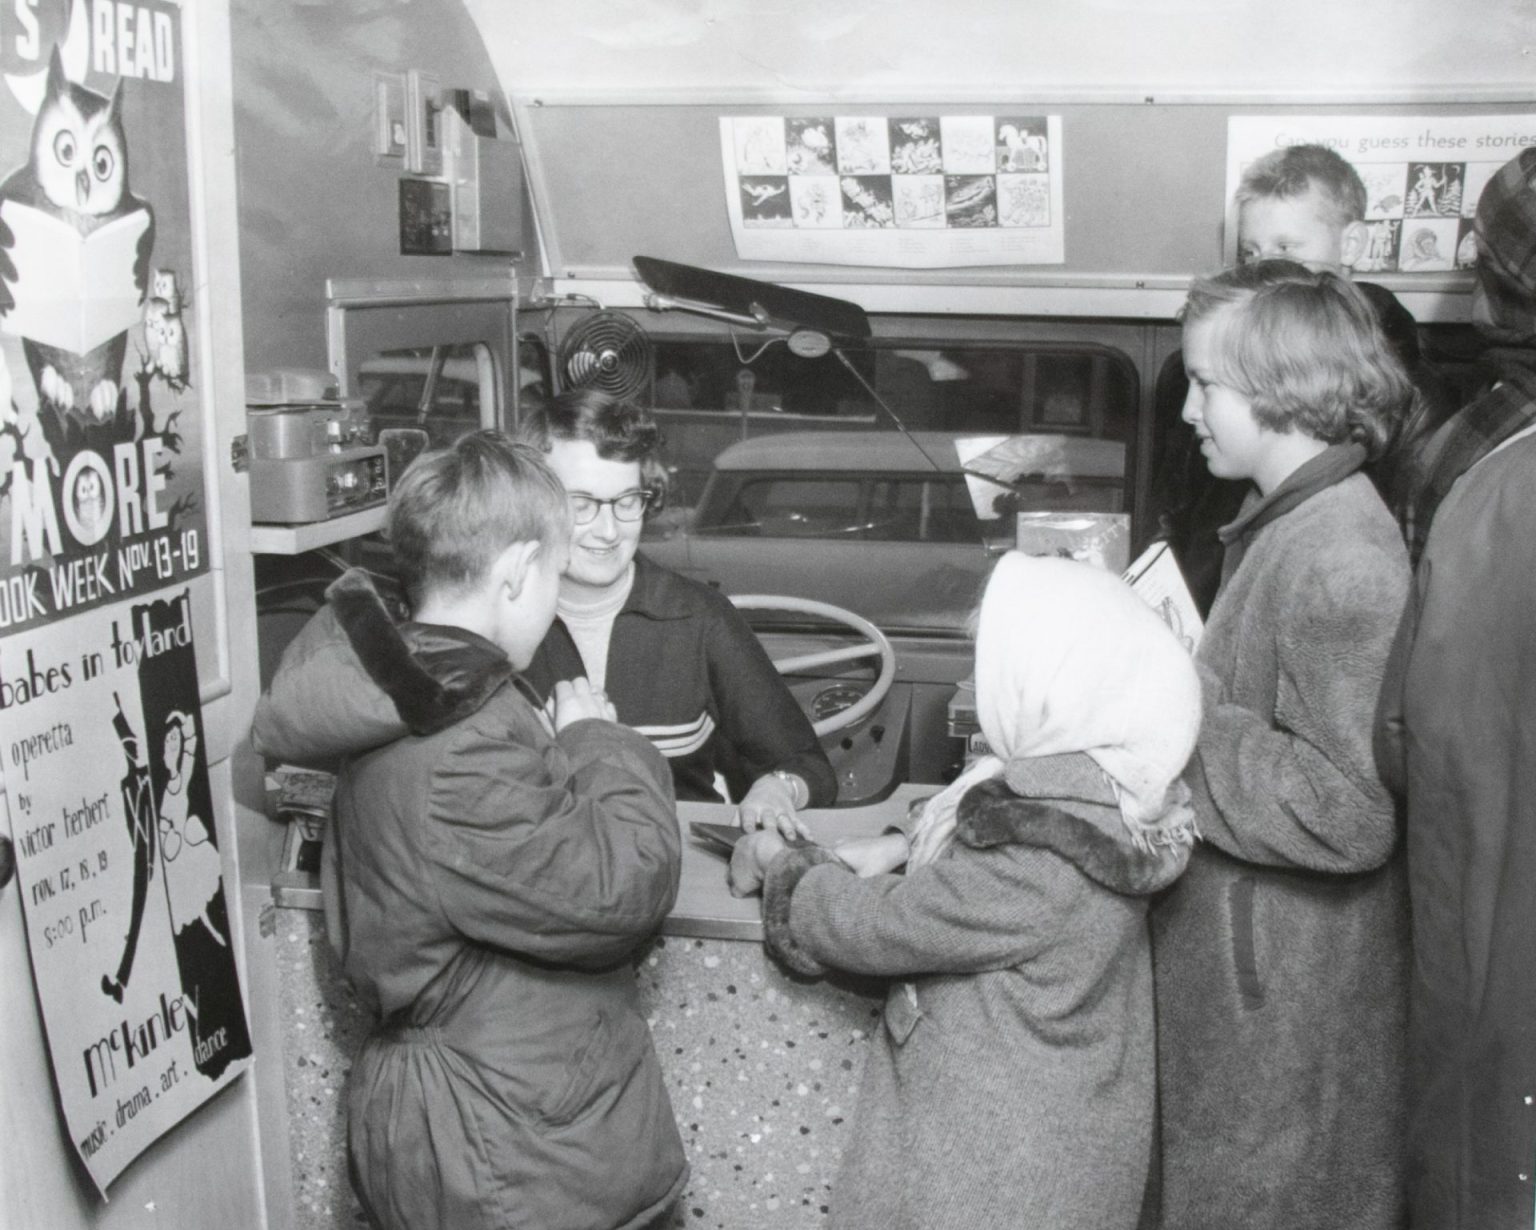 Children in winter coats gather around a check-out desk in front of a seated woman inside a book mobile in this black and white photo.